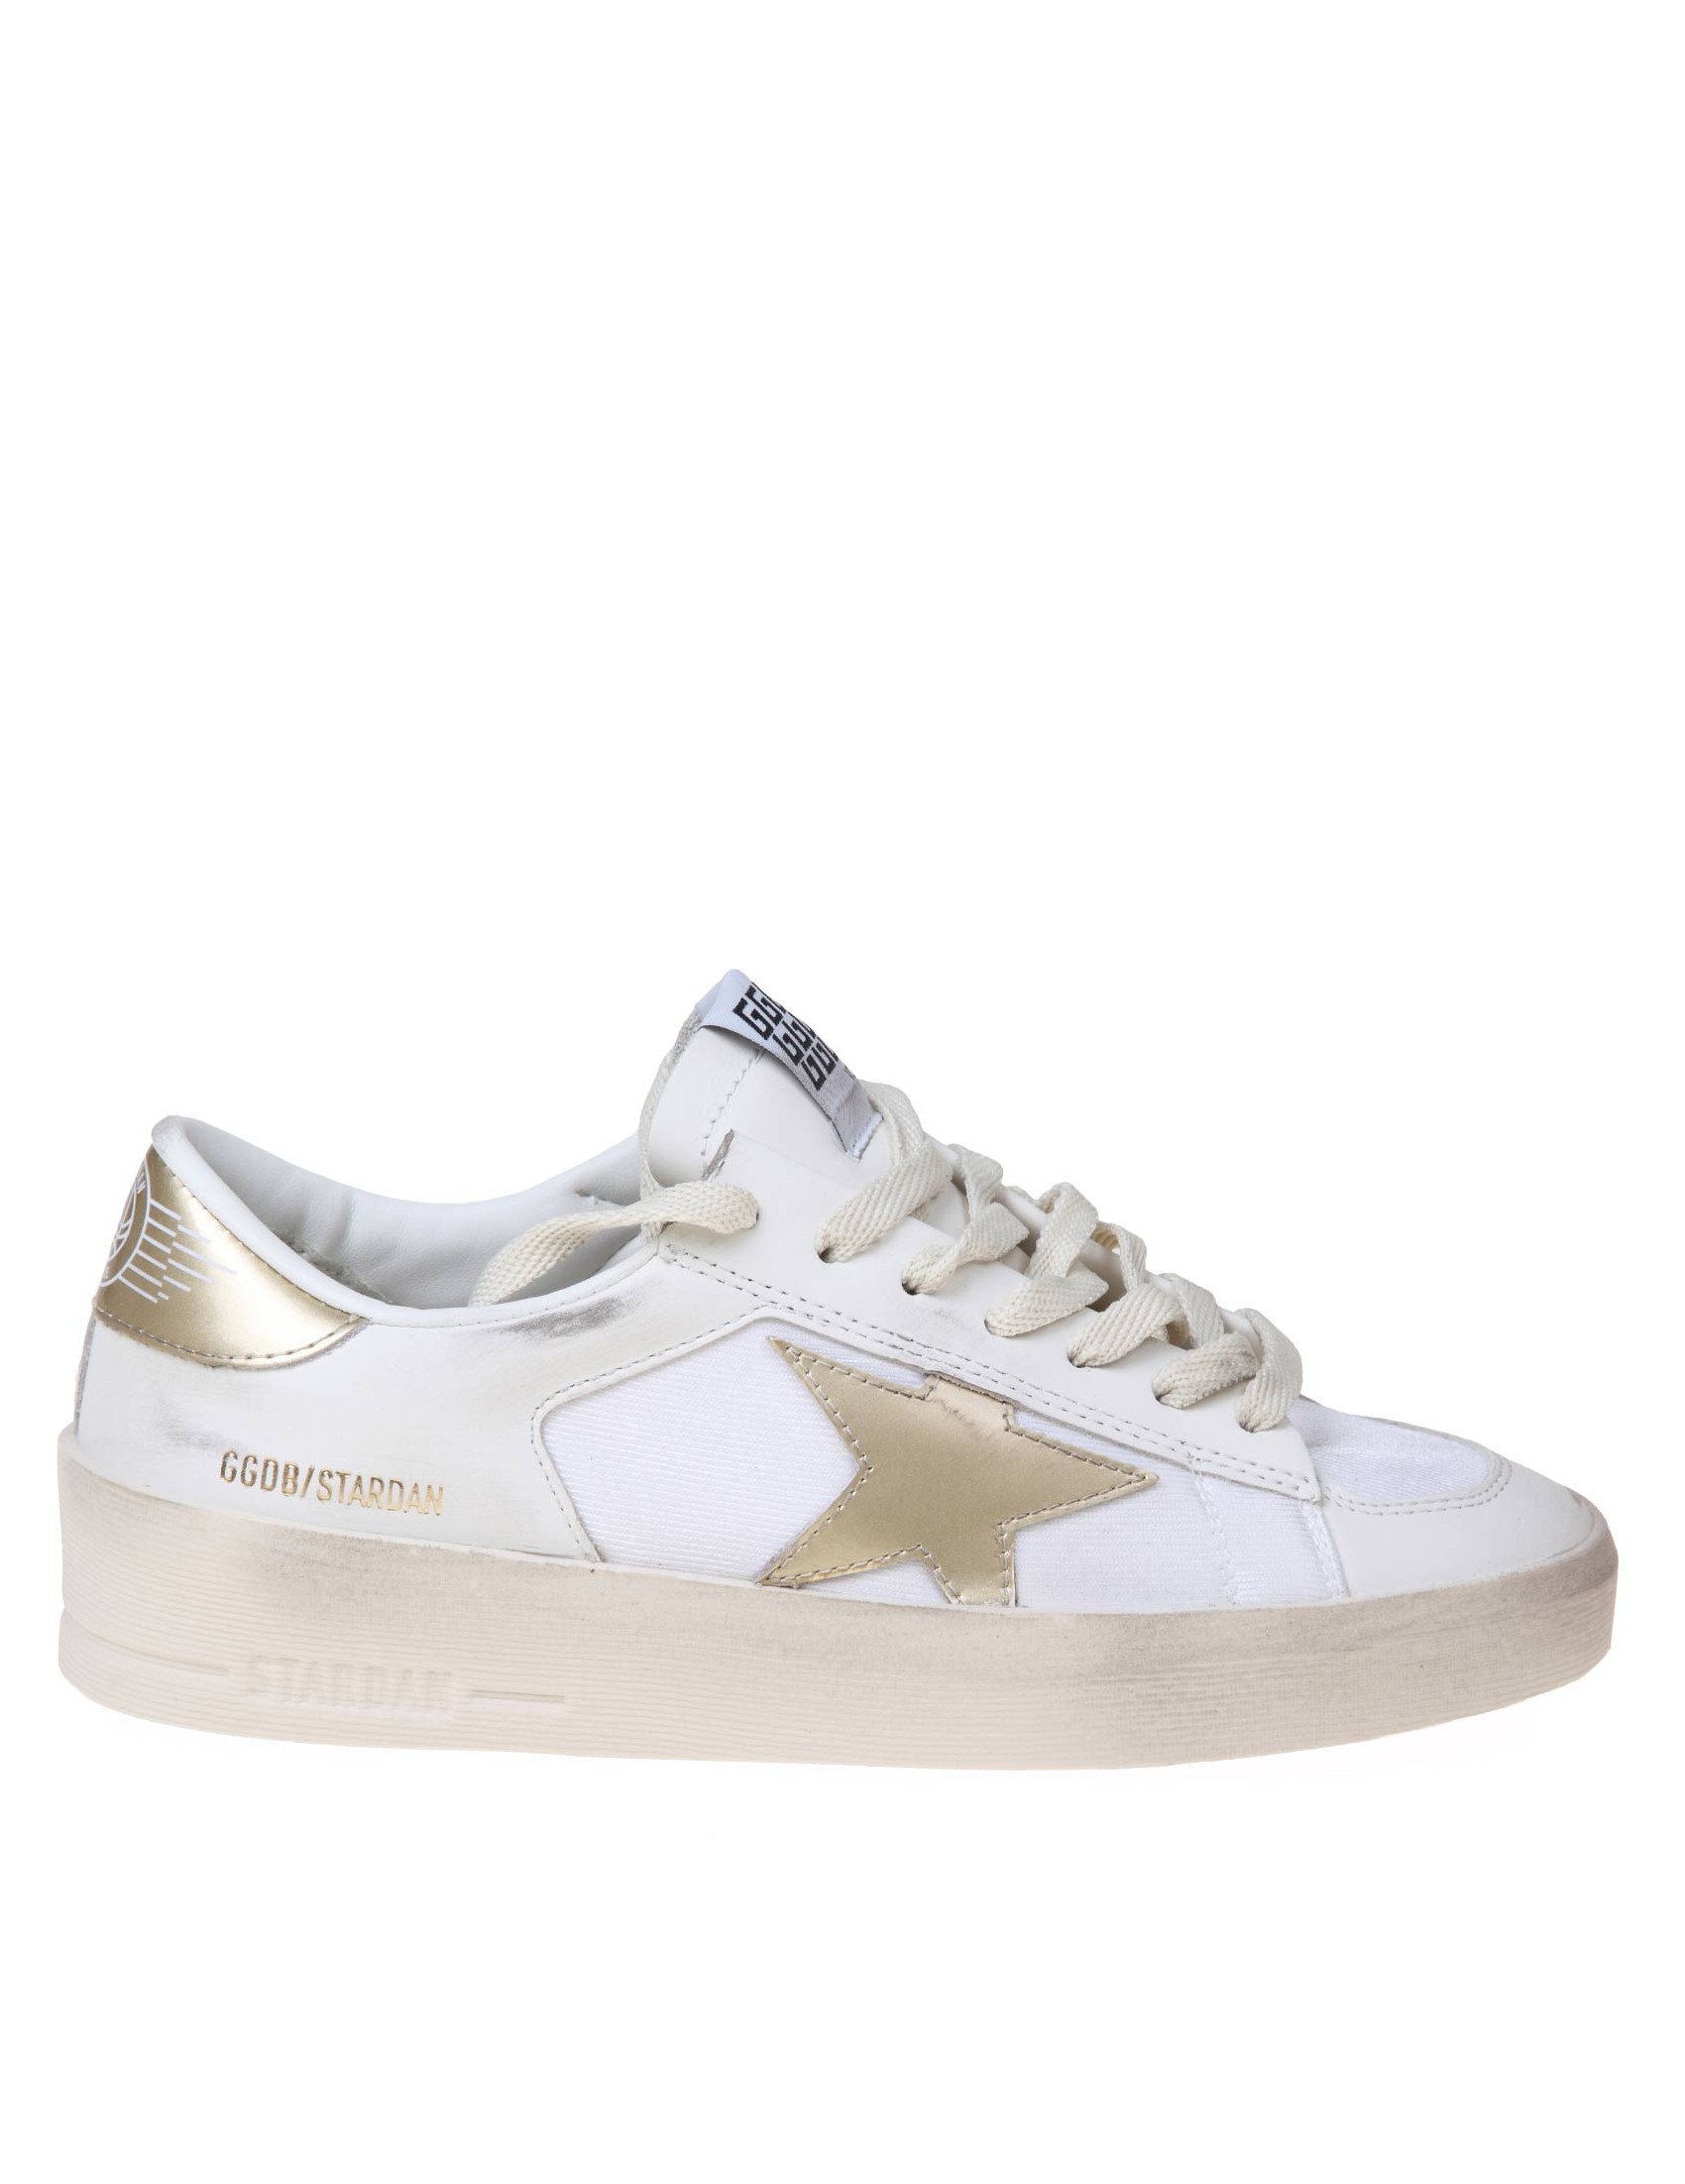 GOLDEN GOOSE STARDAN SNEAKERS IN WHITE AND GOLD LEATHER AND FABRIC